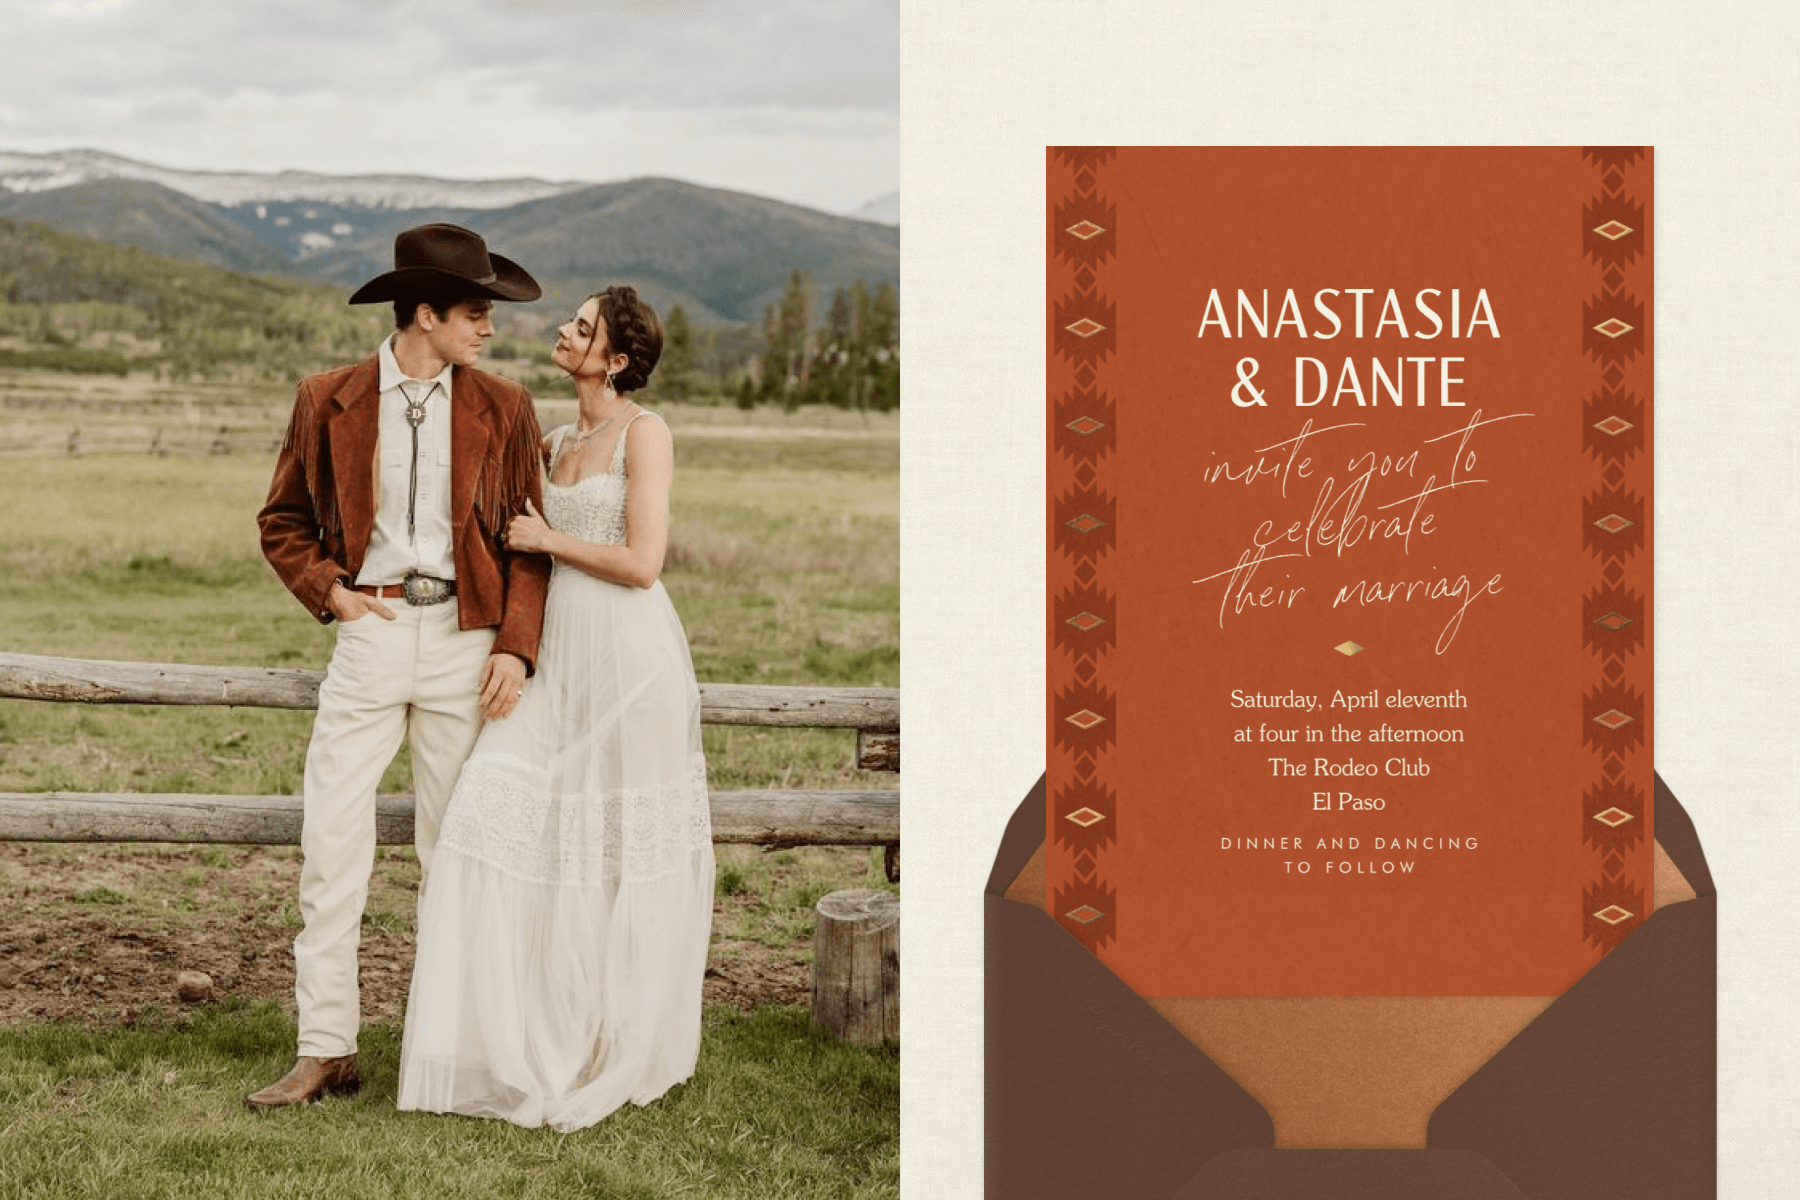 Left: A couple poses on their wedding day on a Western ranch; Right: an umber invitation with a Western-inspired pattern.